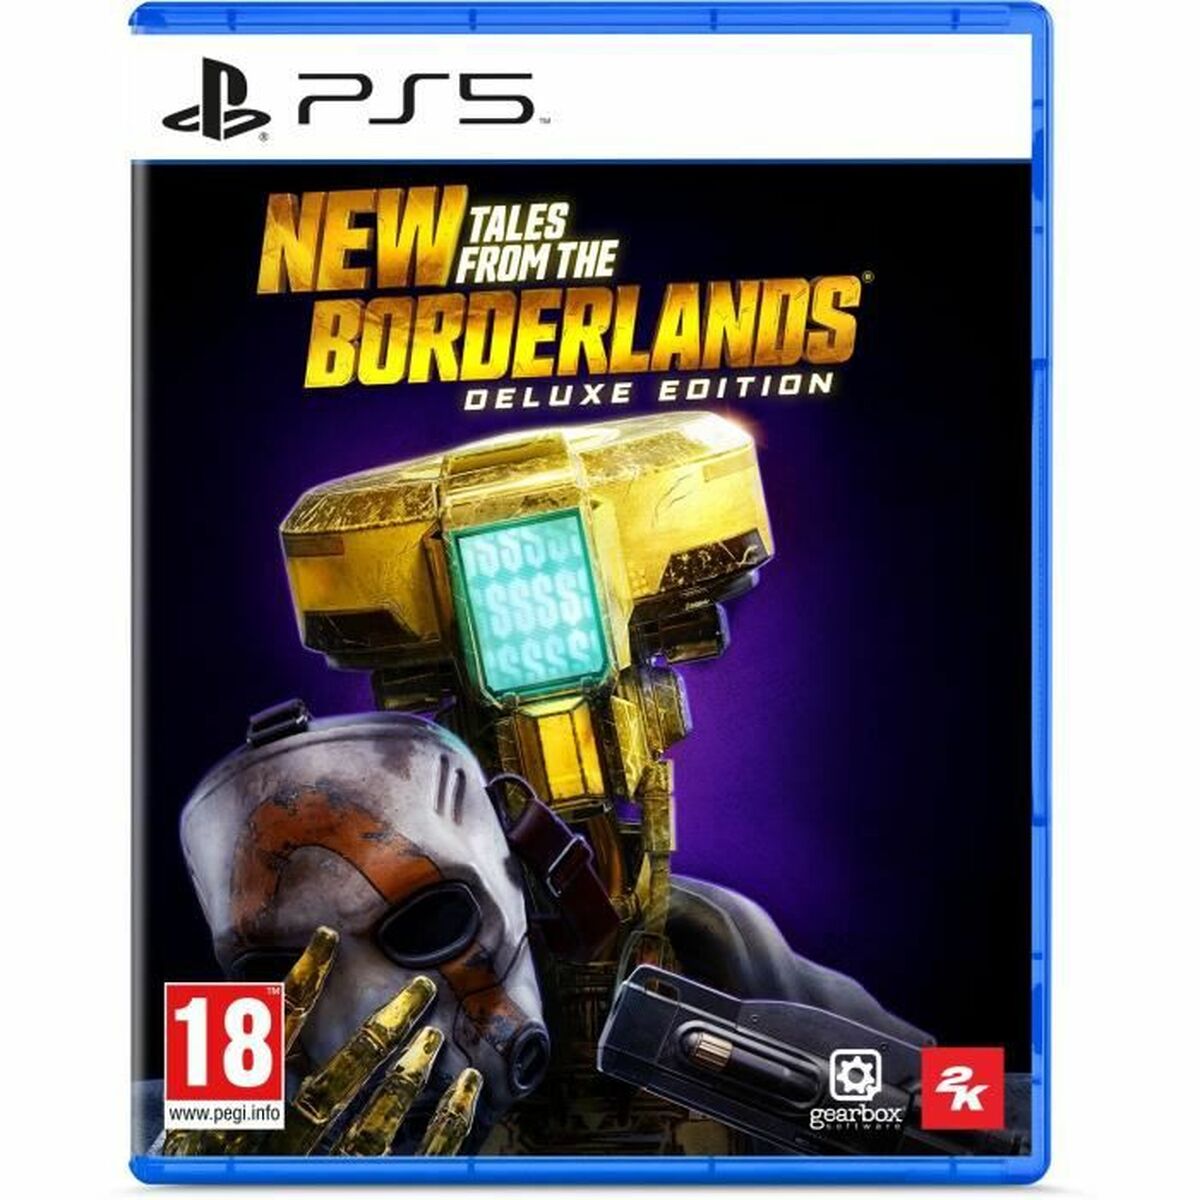 Jeu vidéo PlayStation 5 2K GAMES New Tales From the Borderlands Deluxe Ed.